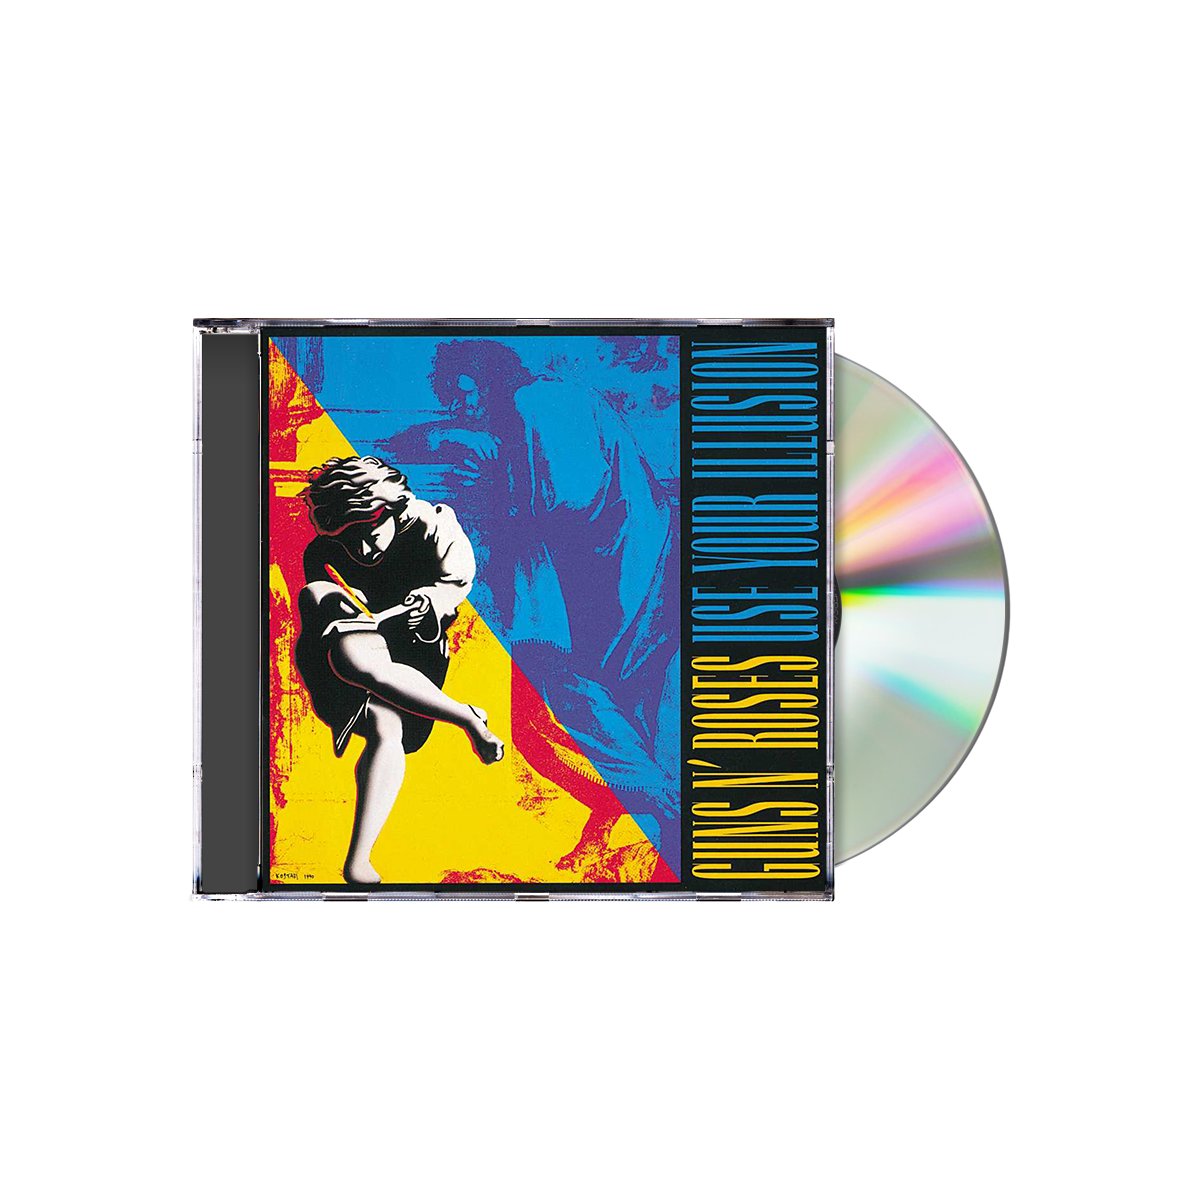 Guns N' Roses - Use Your Illusion II[Deluxe 2 CD] -  Music